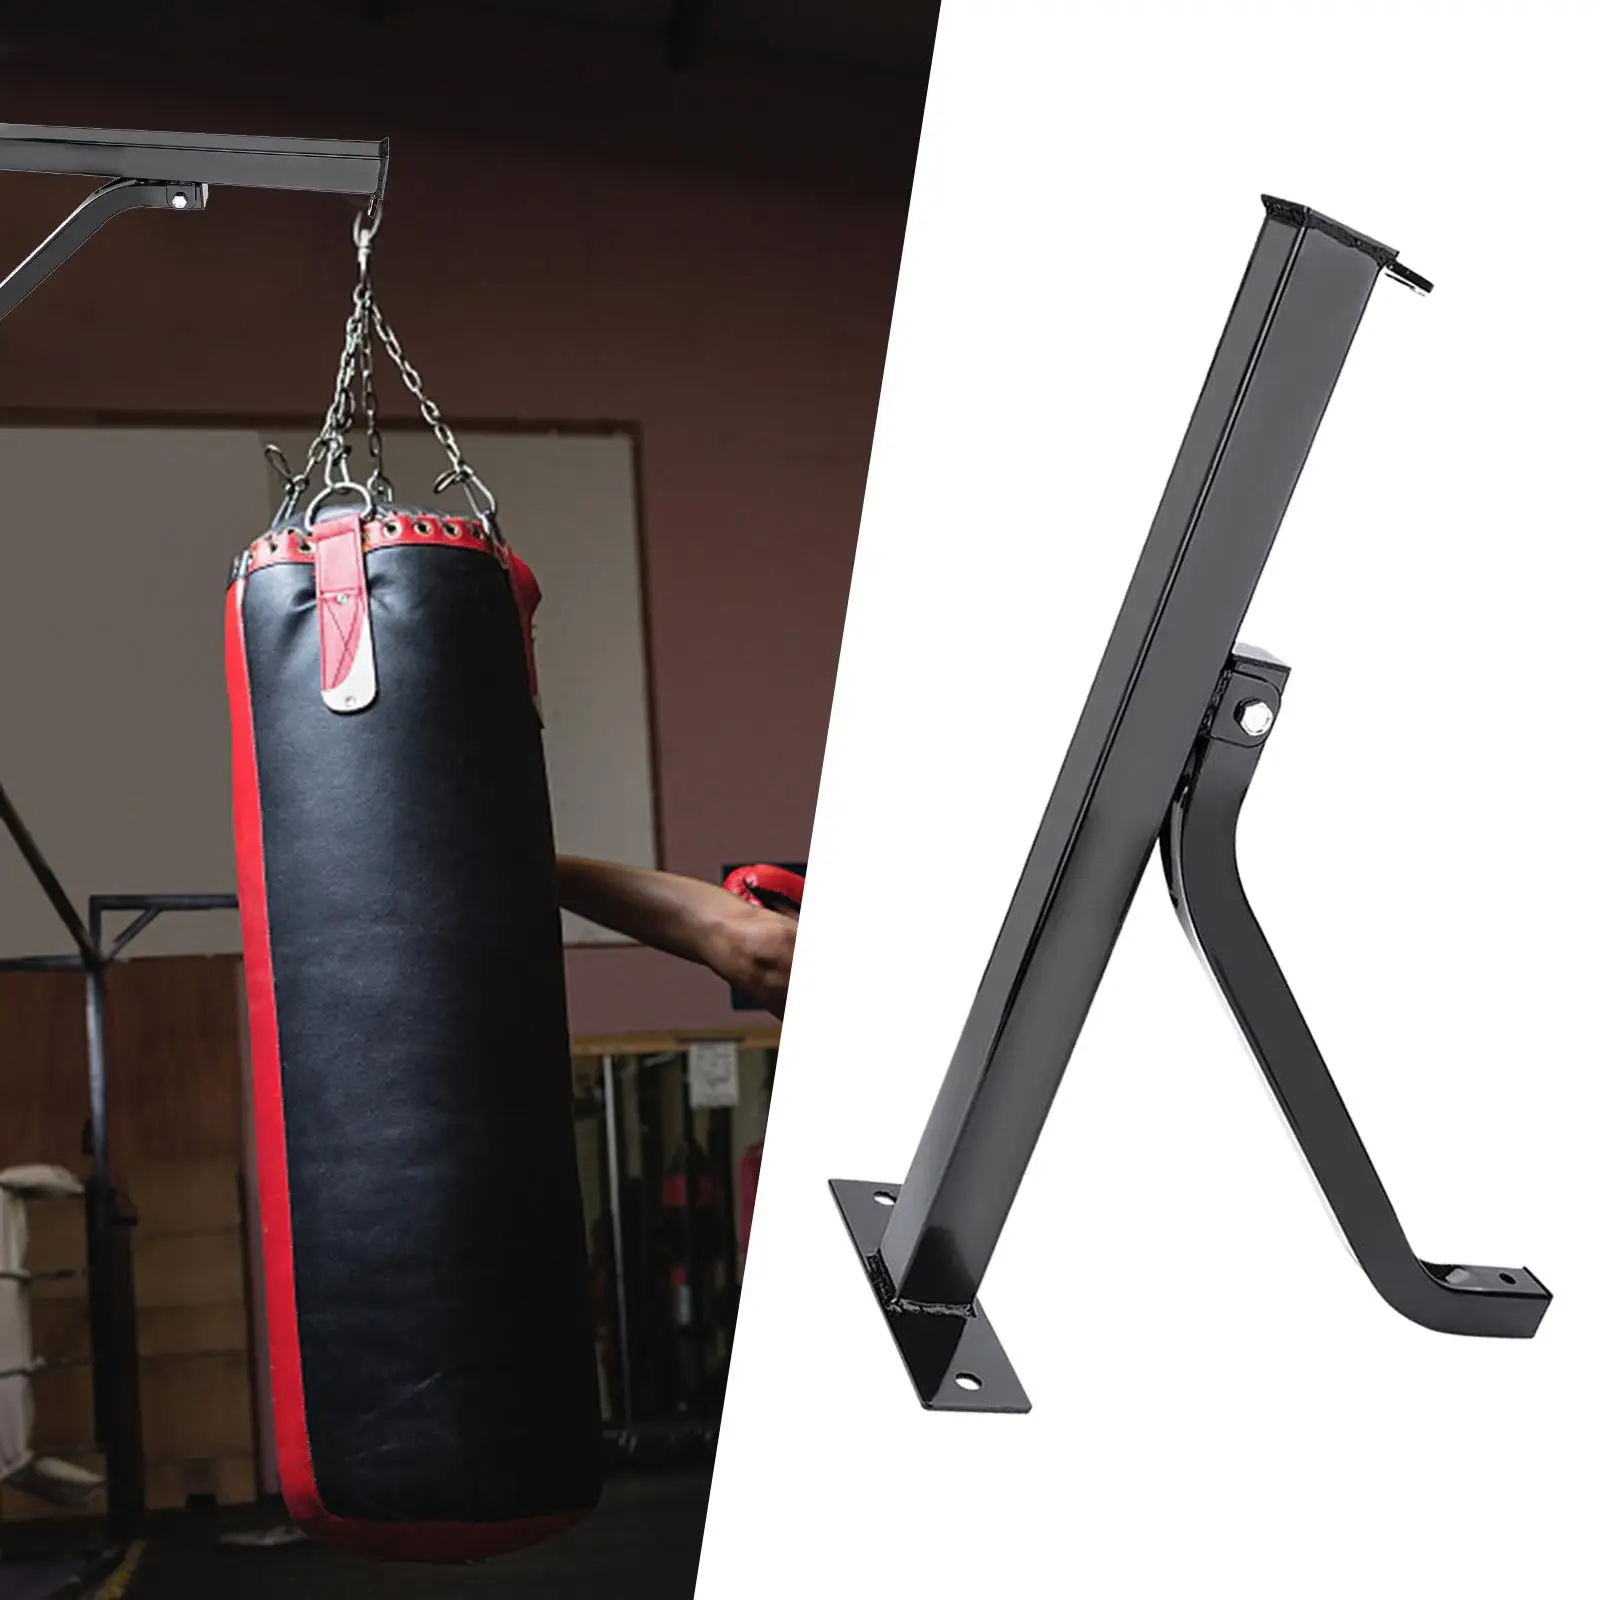 Wall Mount Heavy Bag Hanger Punching Bag Wall Bracket Boxing Bag Stand Training Holder for Muay Thai Fitness Home Accessories